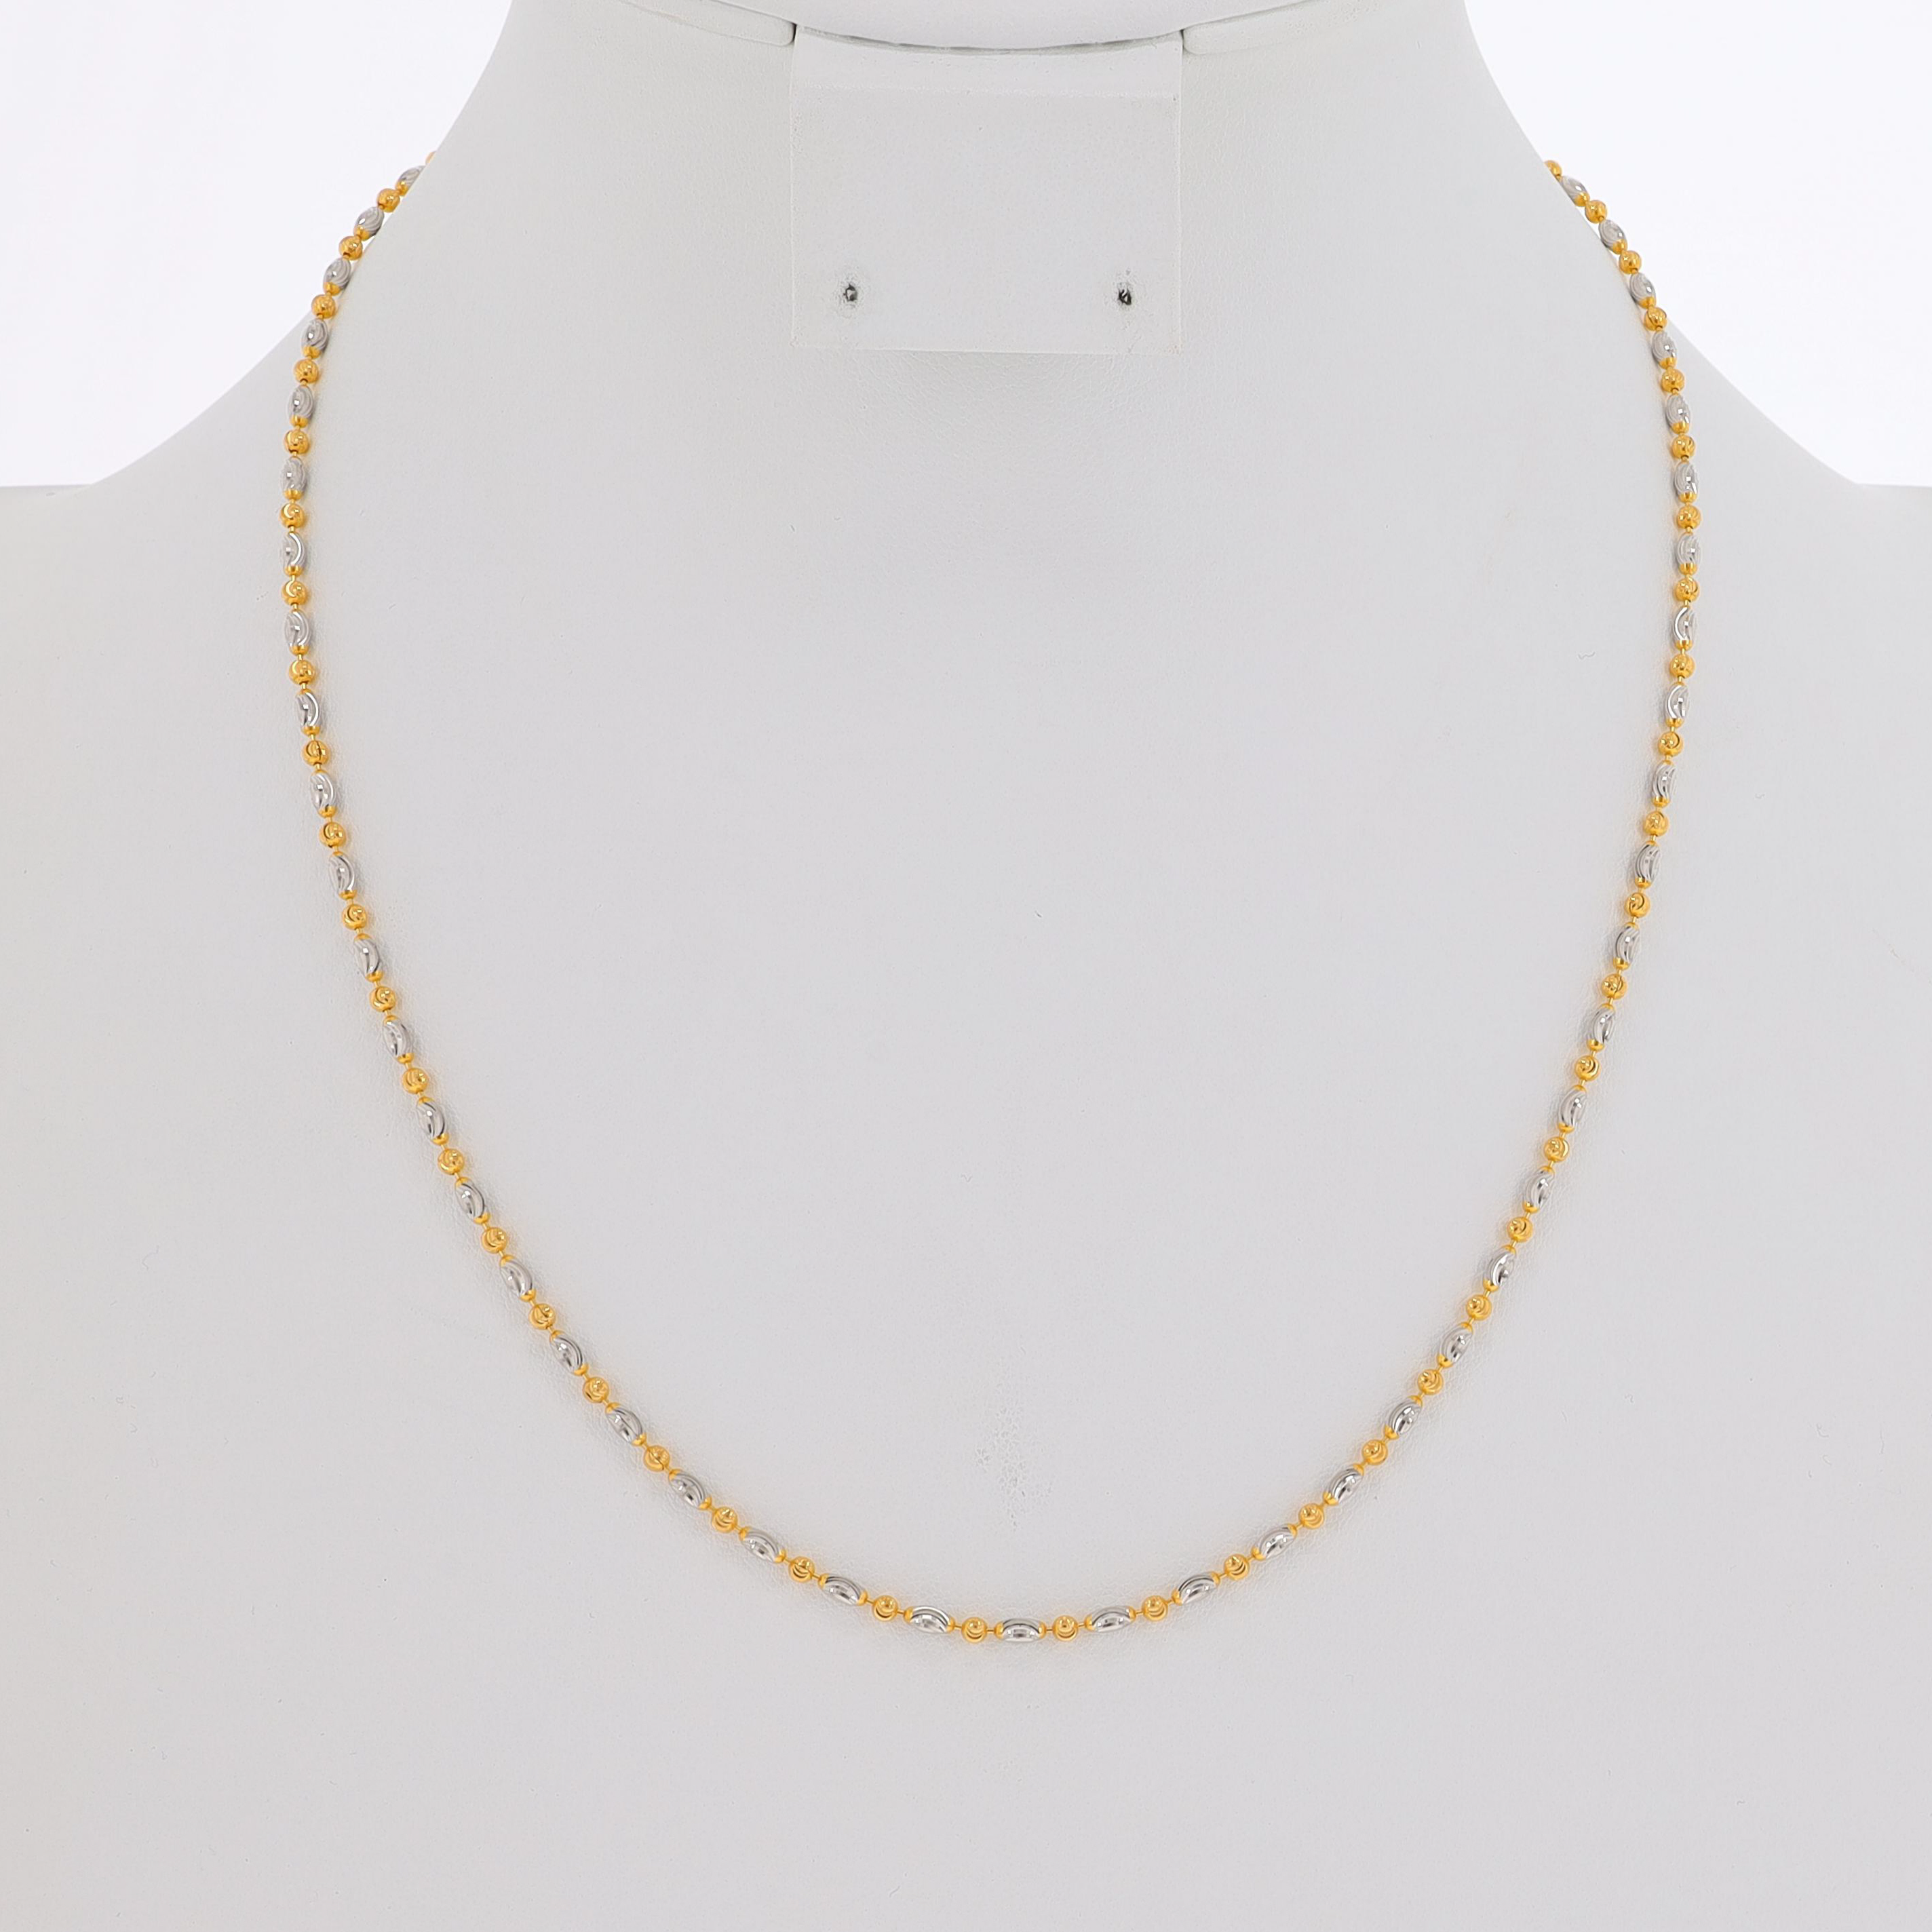 TWO-TONE BEADS CHAIN